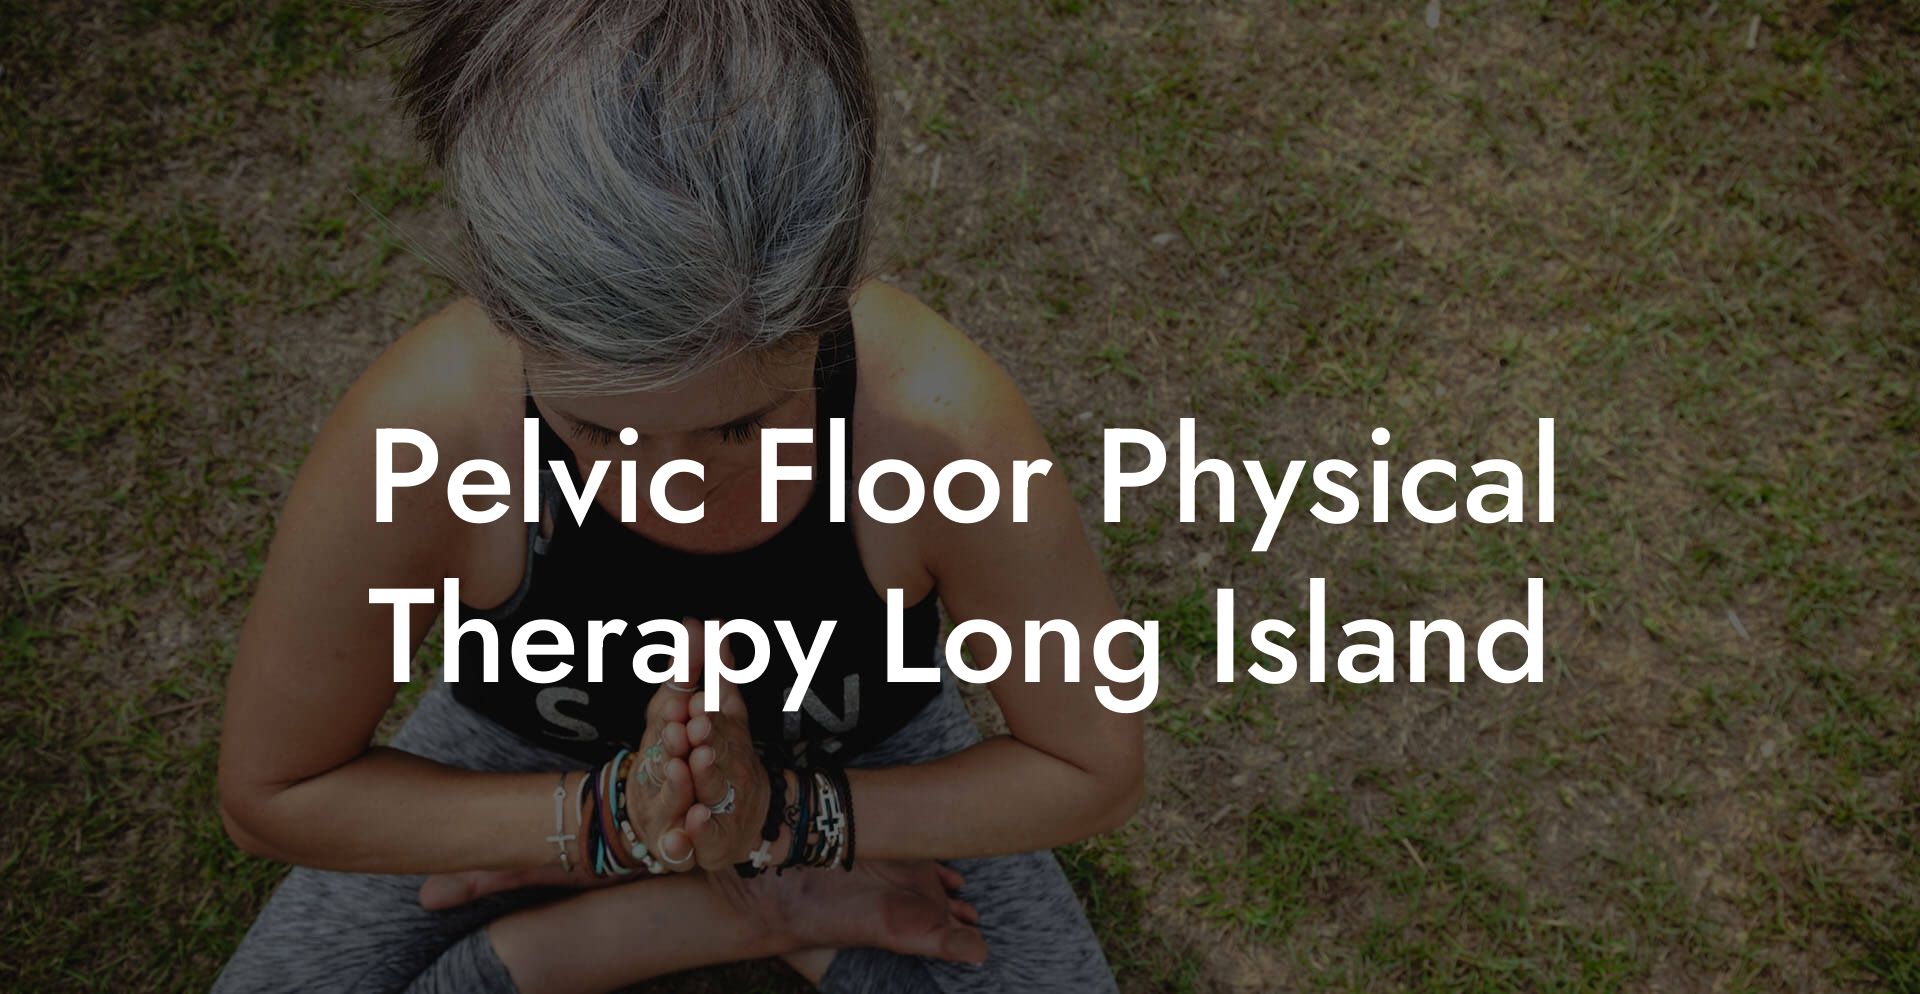 Pelvic Floor Physical Therapy Long Island